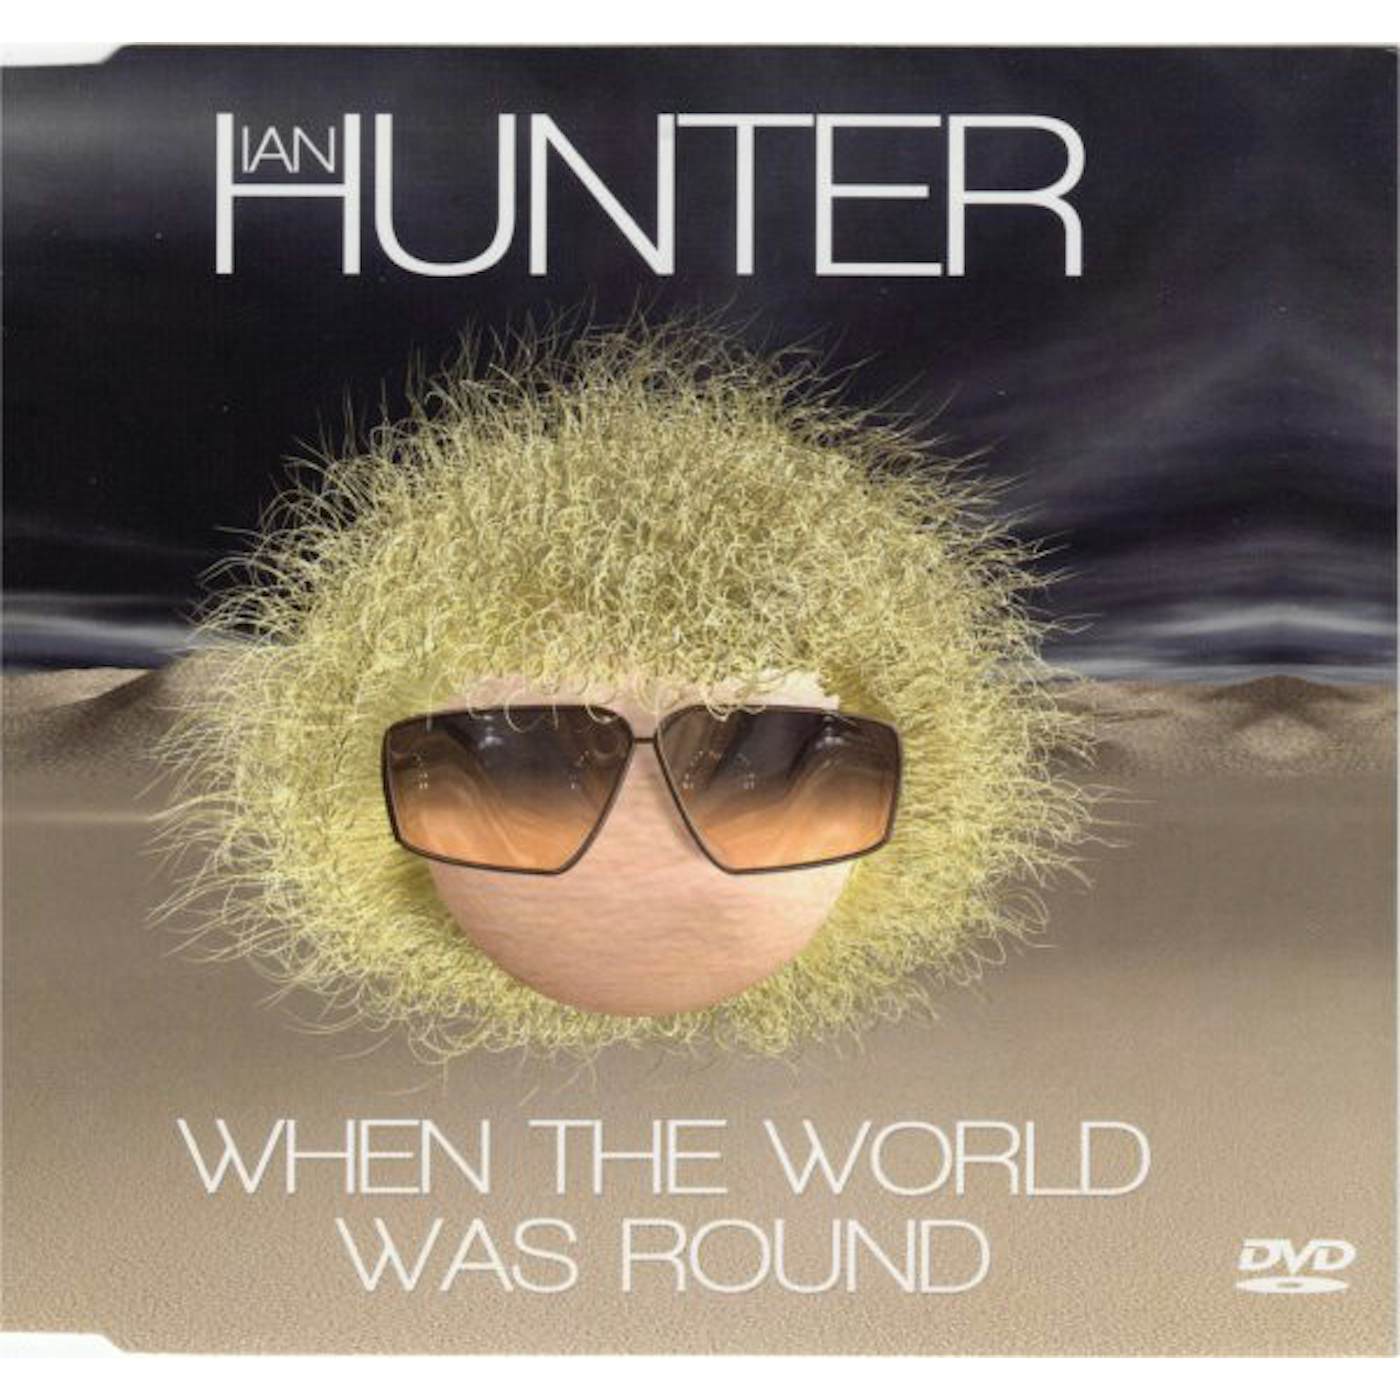 Ian Hunter WHEN THE WORLD WAS ROUND Vinyl Record - UK Release